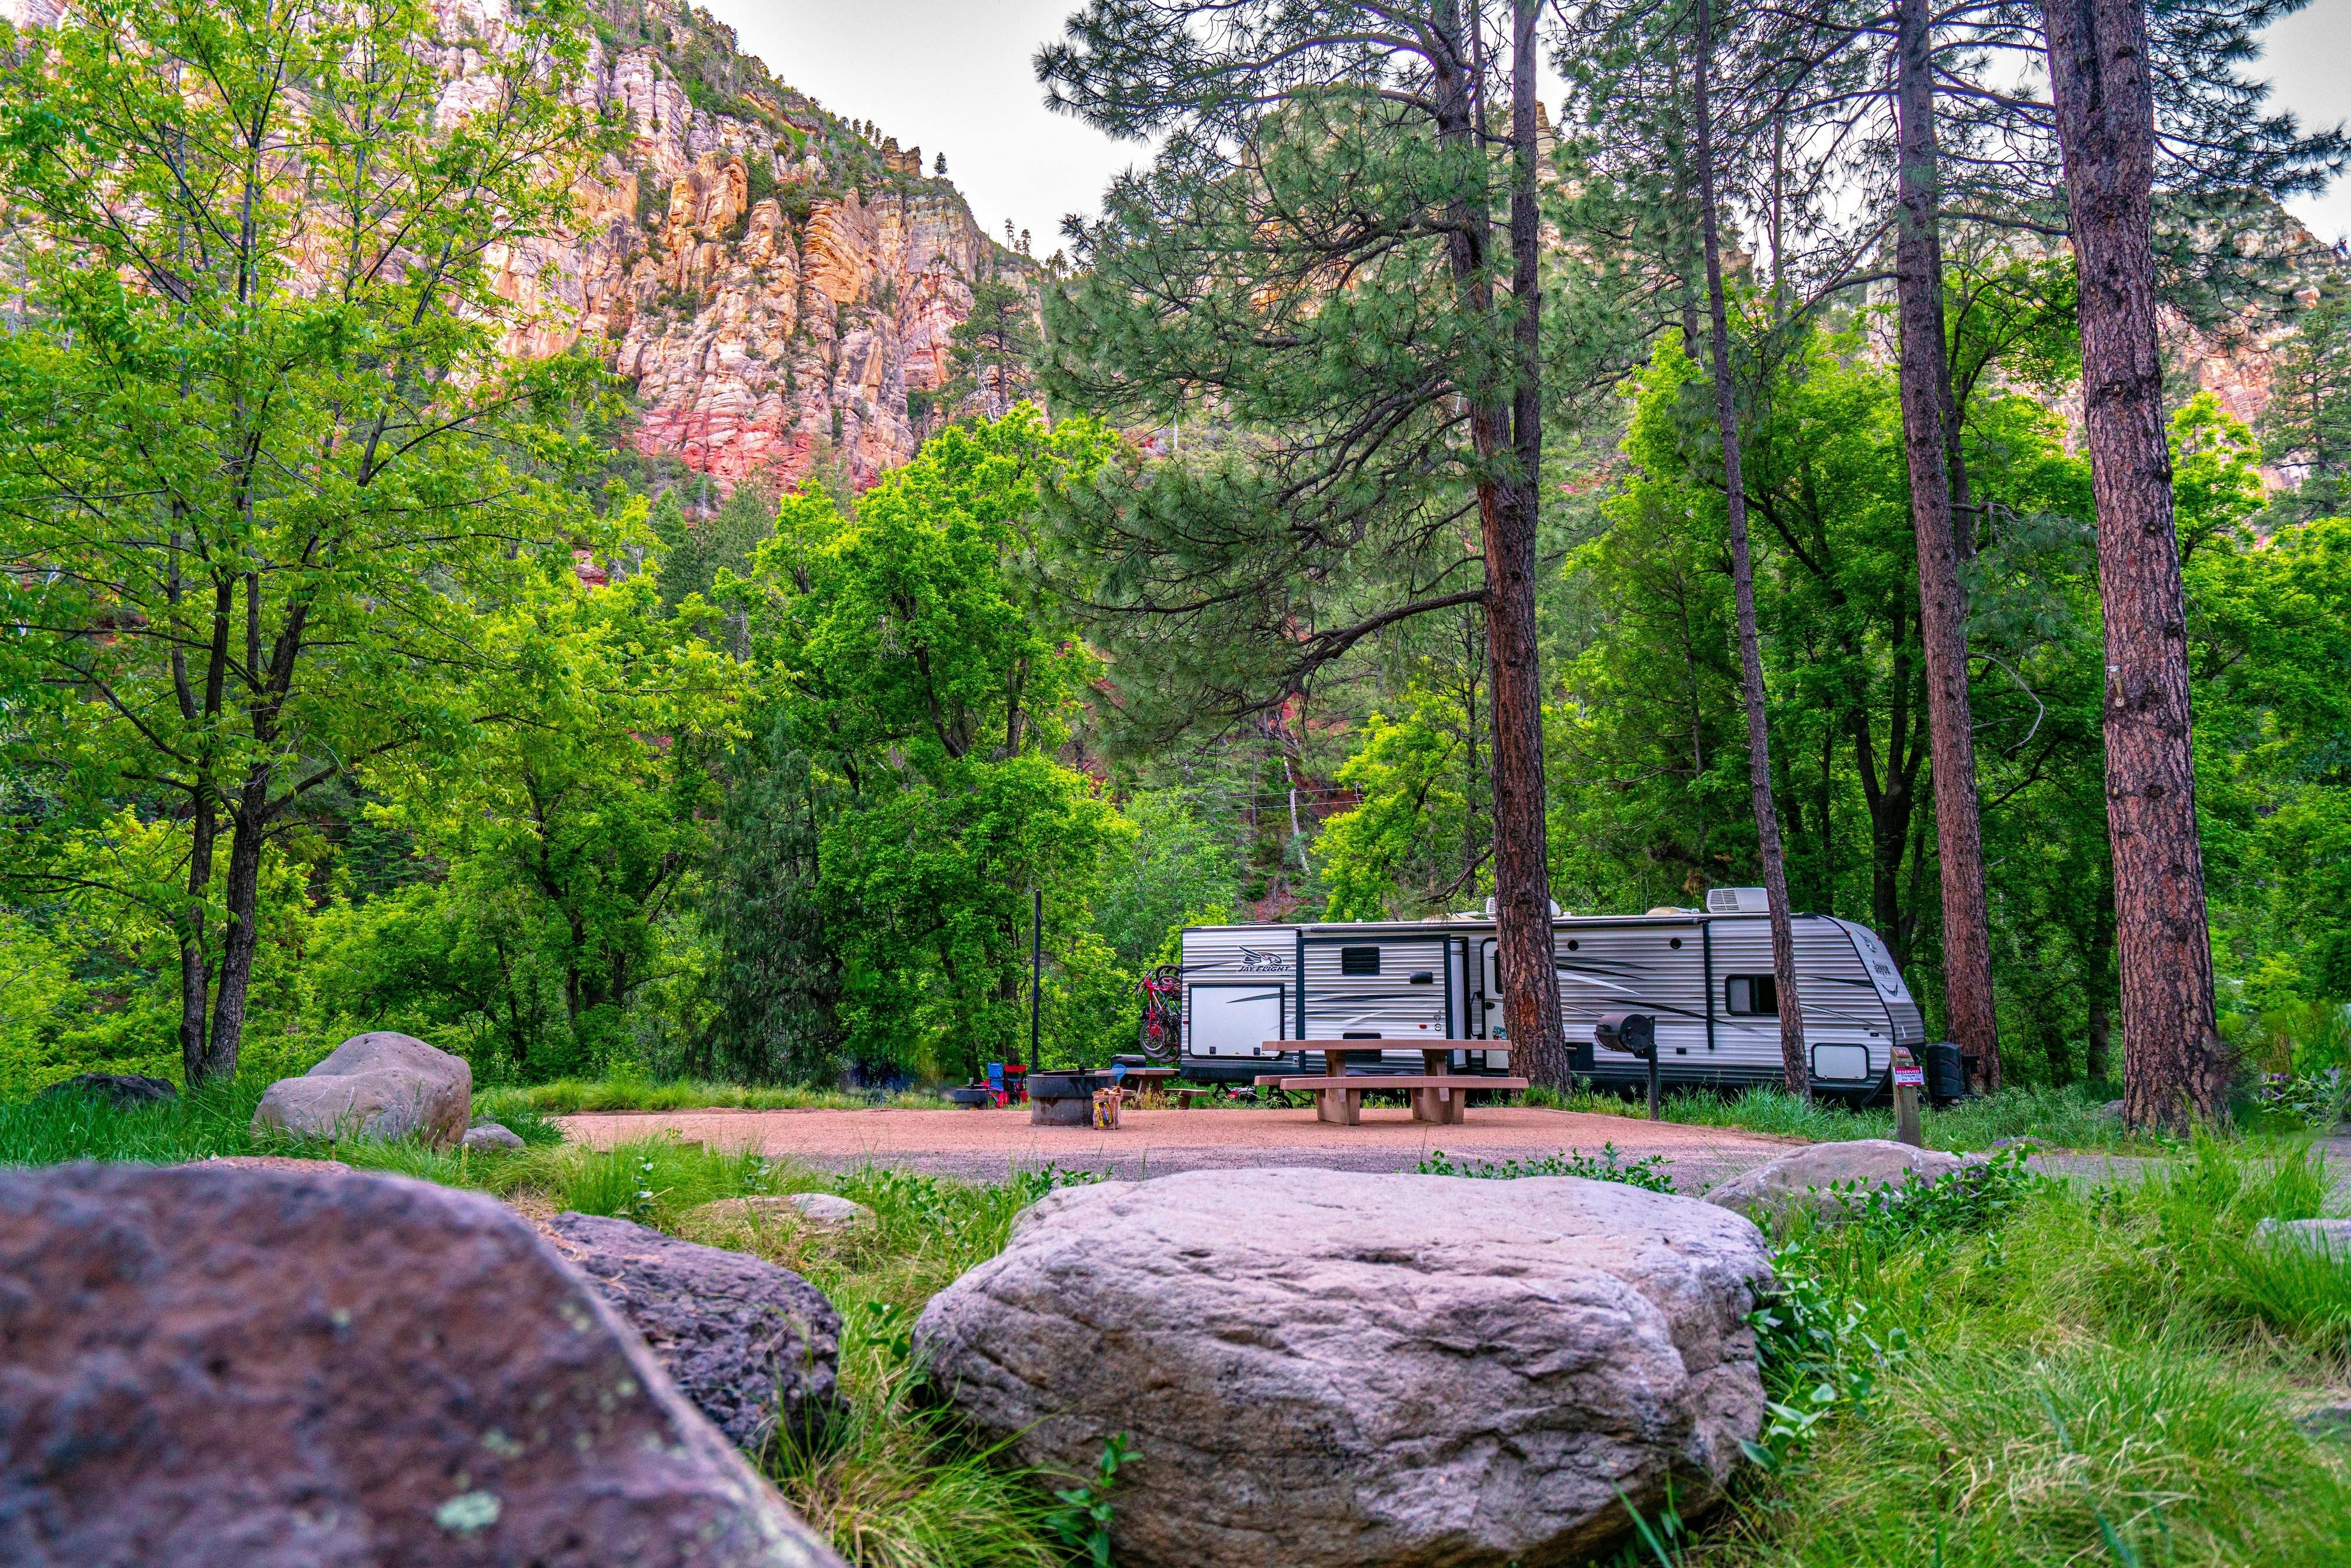 Renee Tilby's Jayco travel trailer at a campsite in coconino national forest